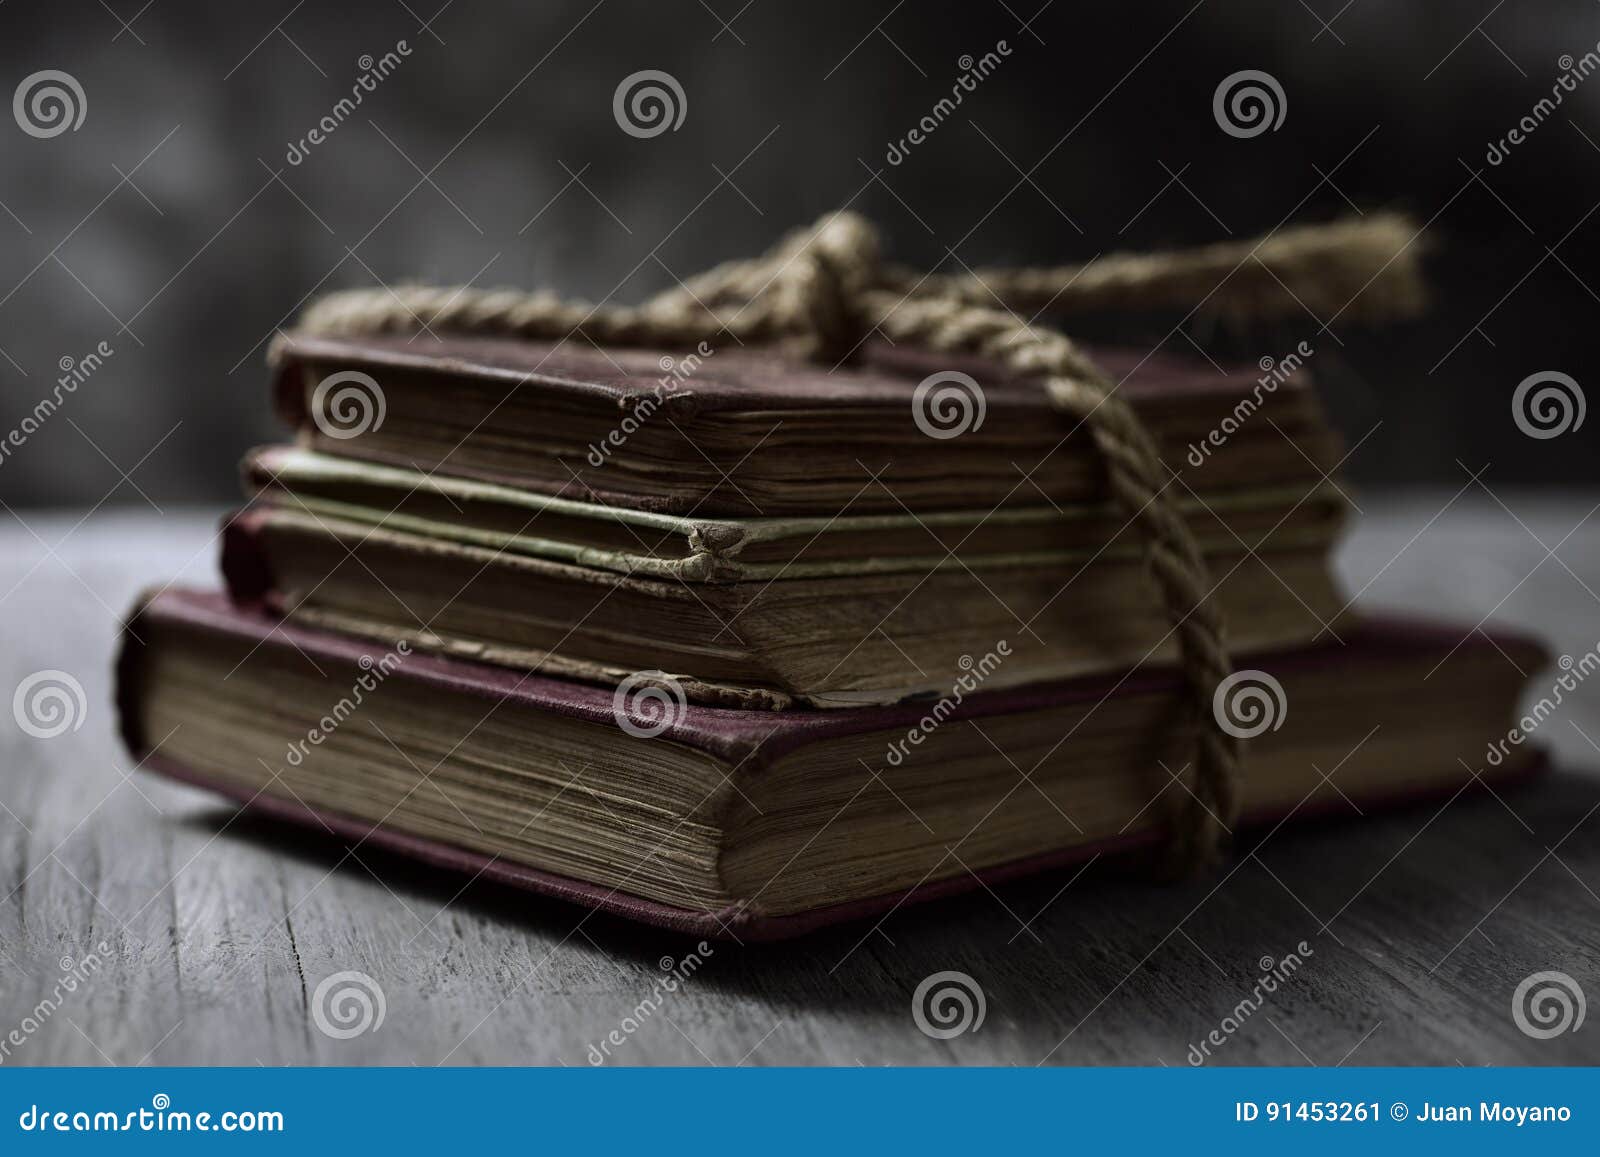 old books tied with a string